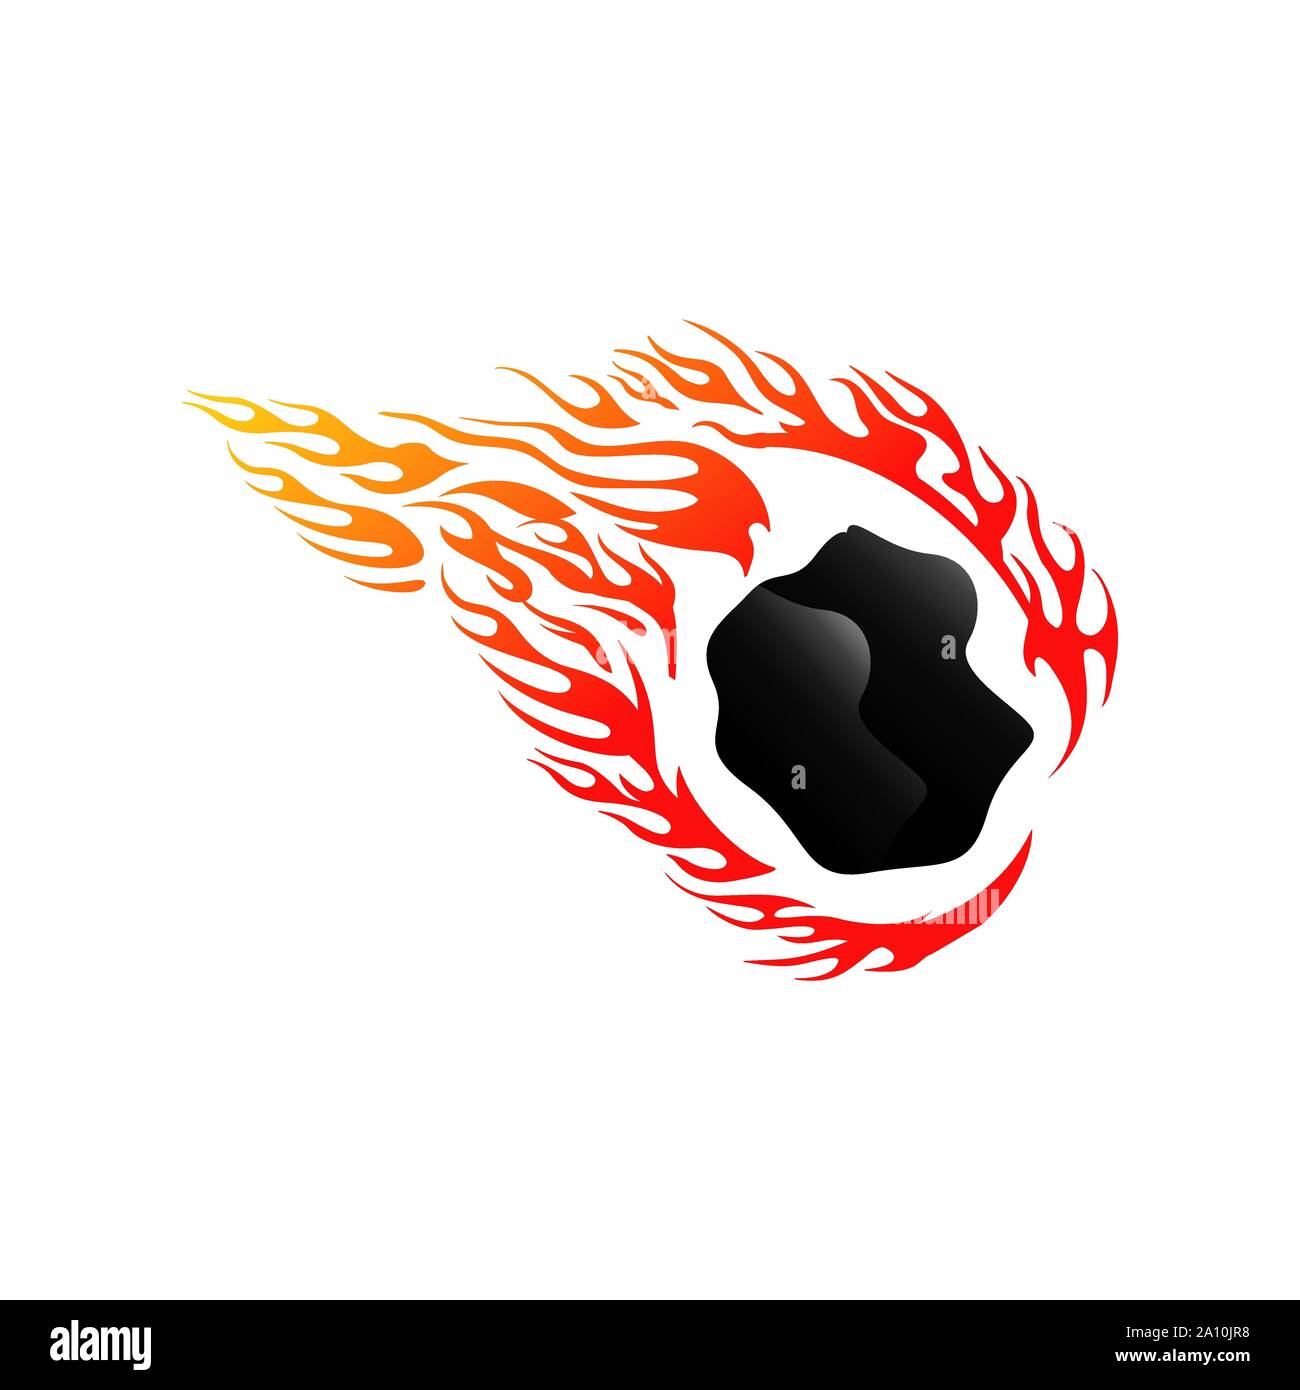 flames of falling meteor comet logo vector icon illustration Stock Vector